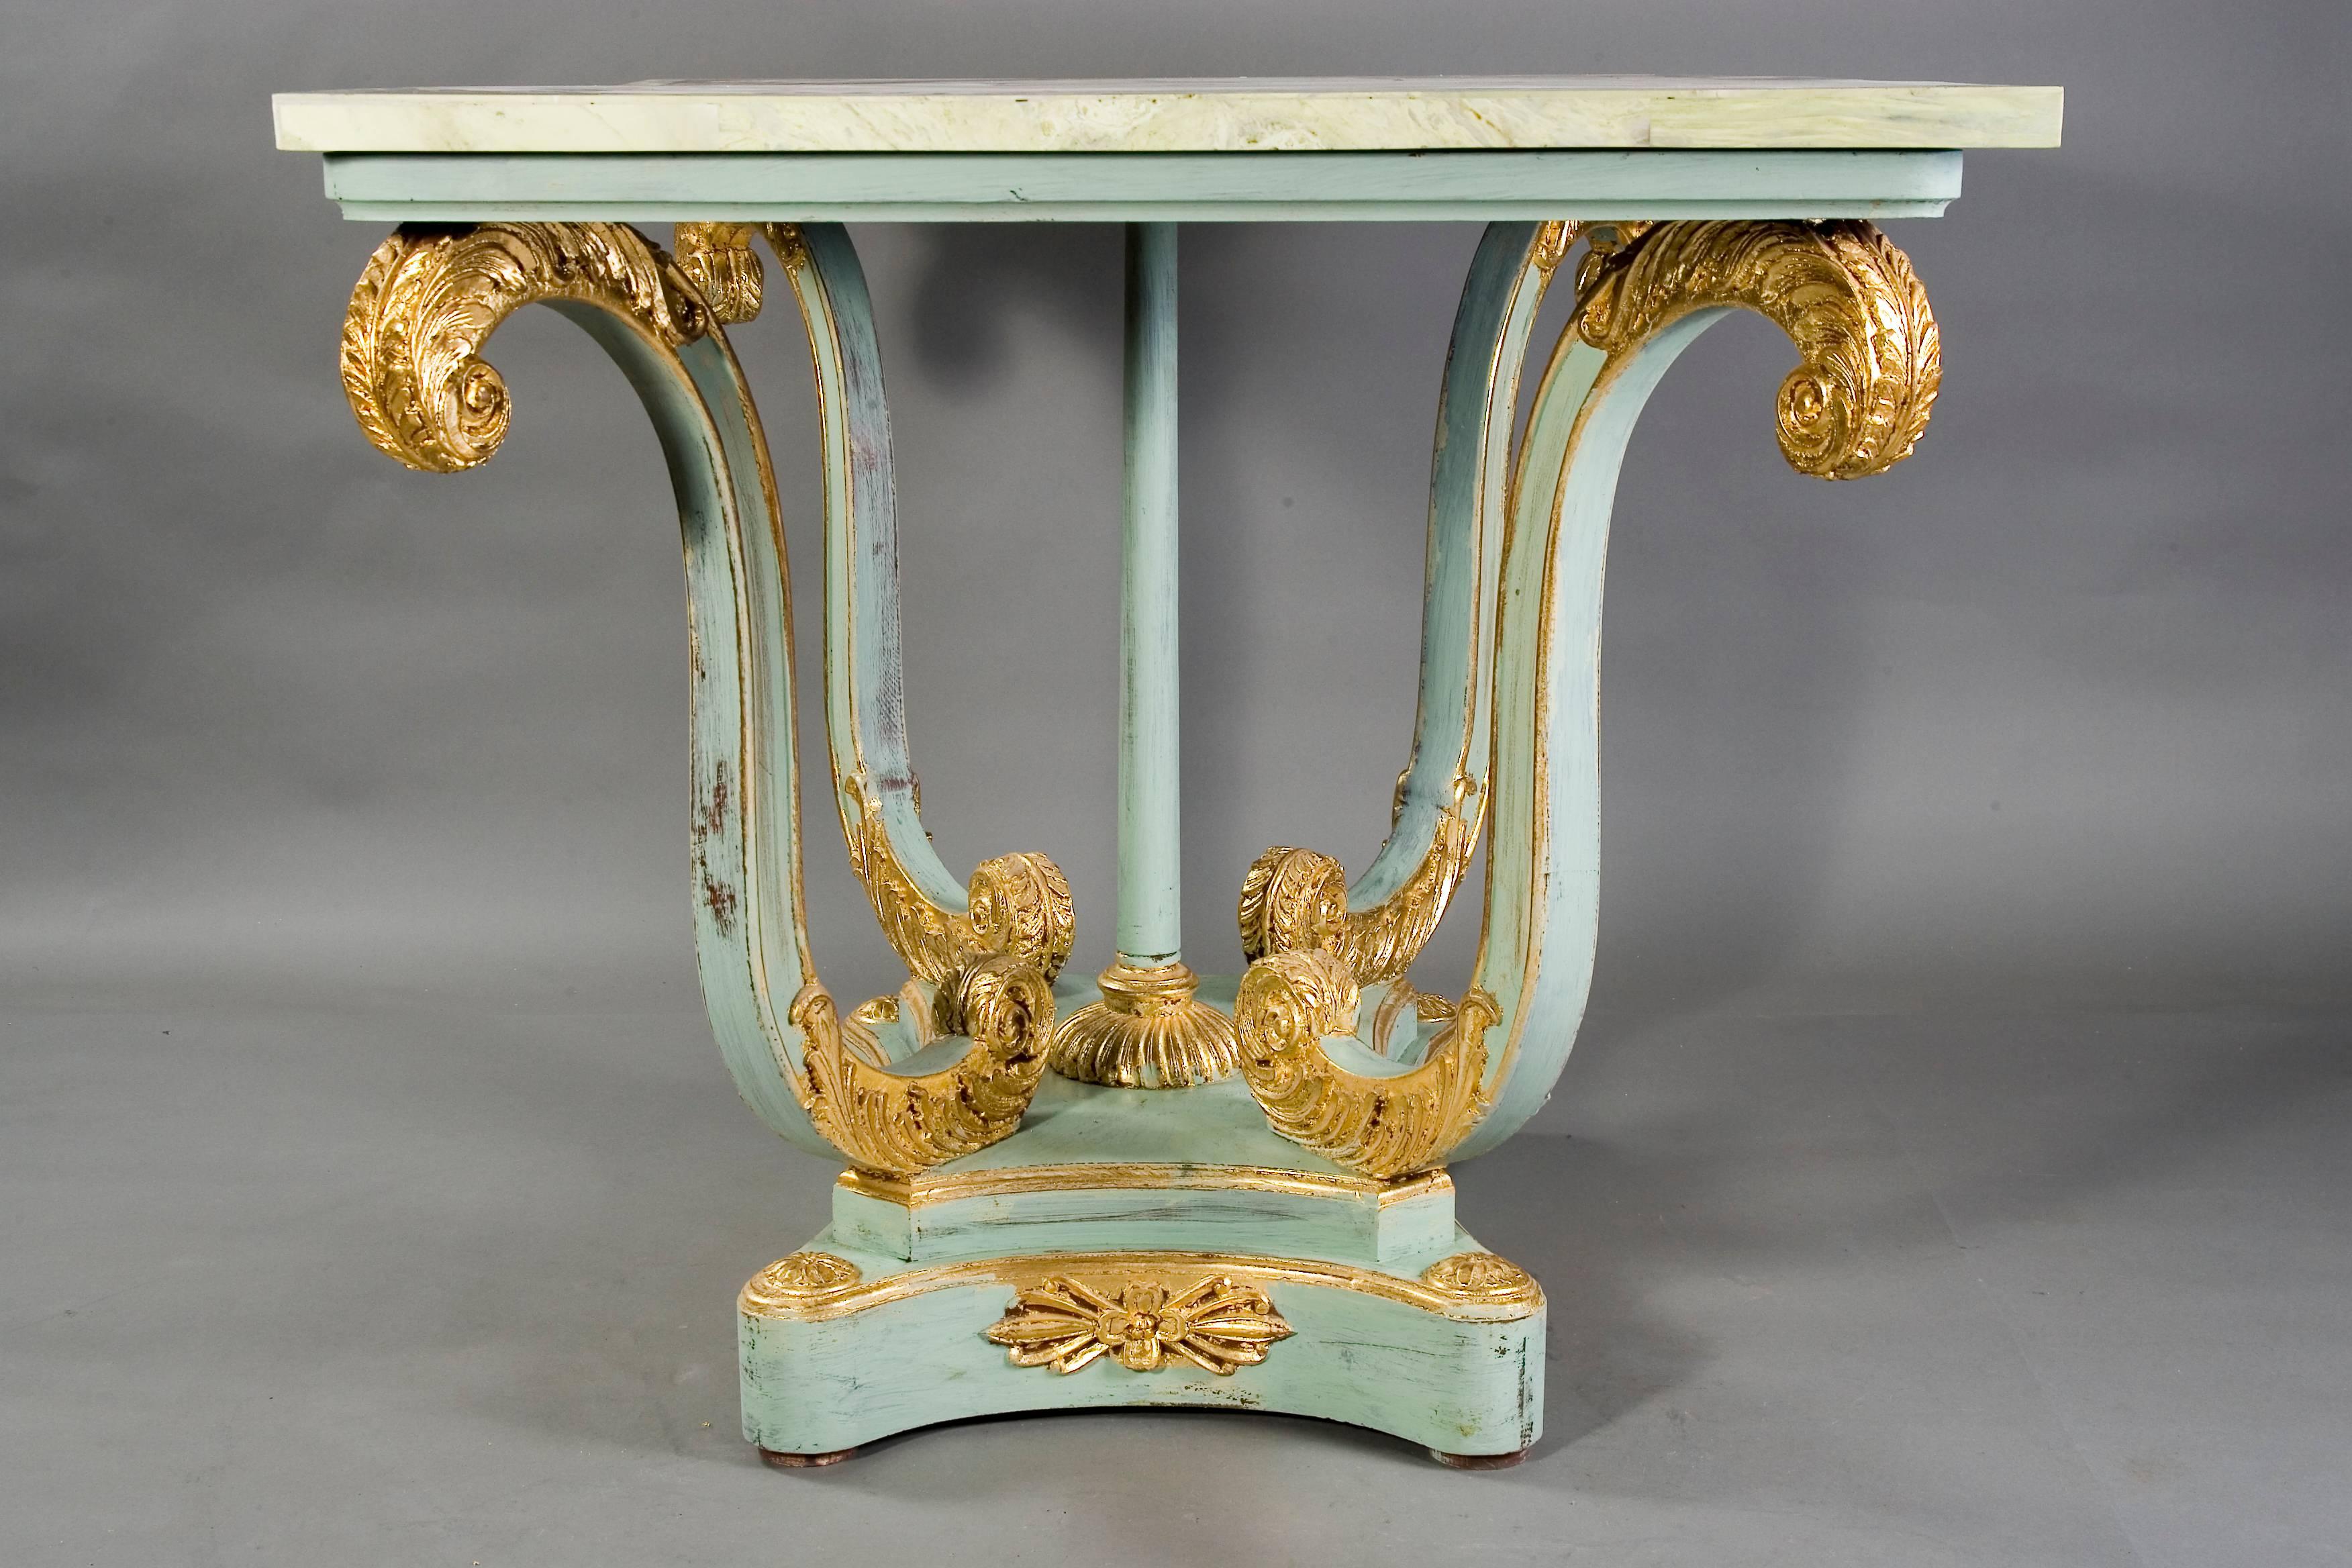 20th Century Pietra-Dura Style of Classicism Pastel Light Blue Table In Good Condition For Sale In Berlin, DE